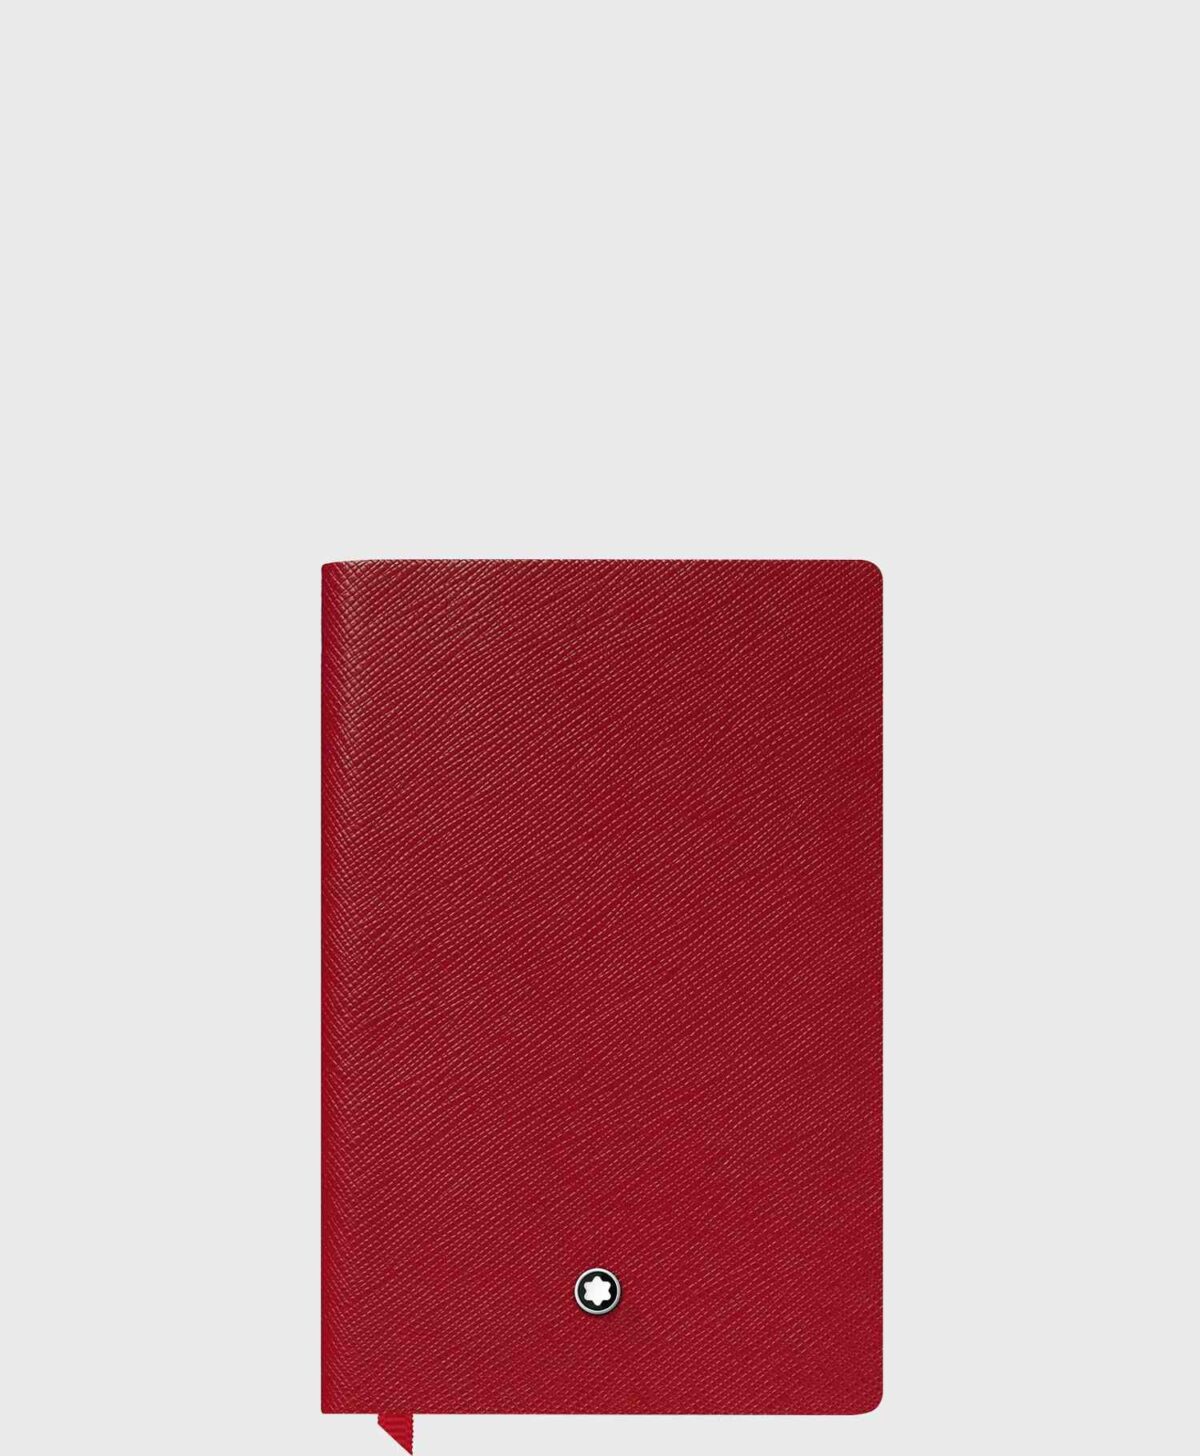 Sổ Montblanc Notebook #148, Red, lined MB118039